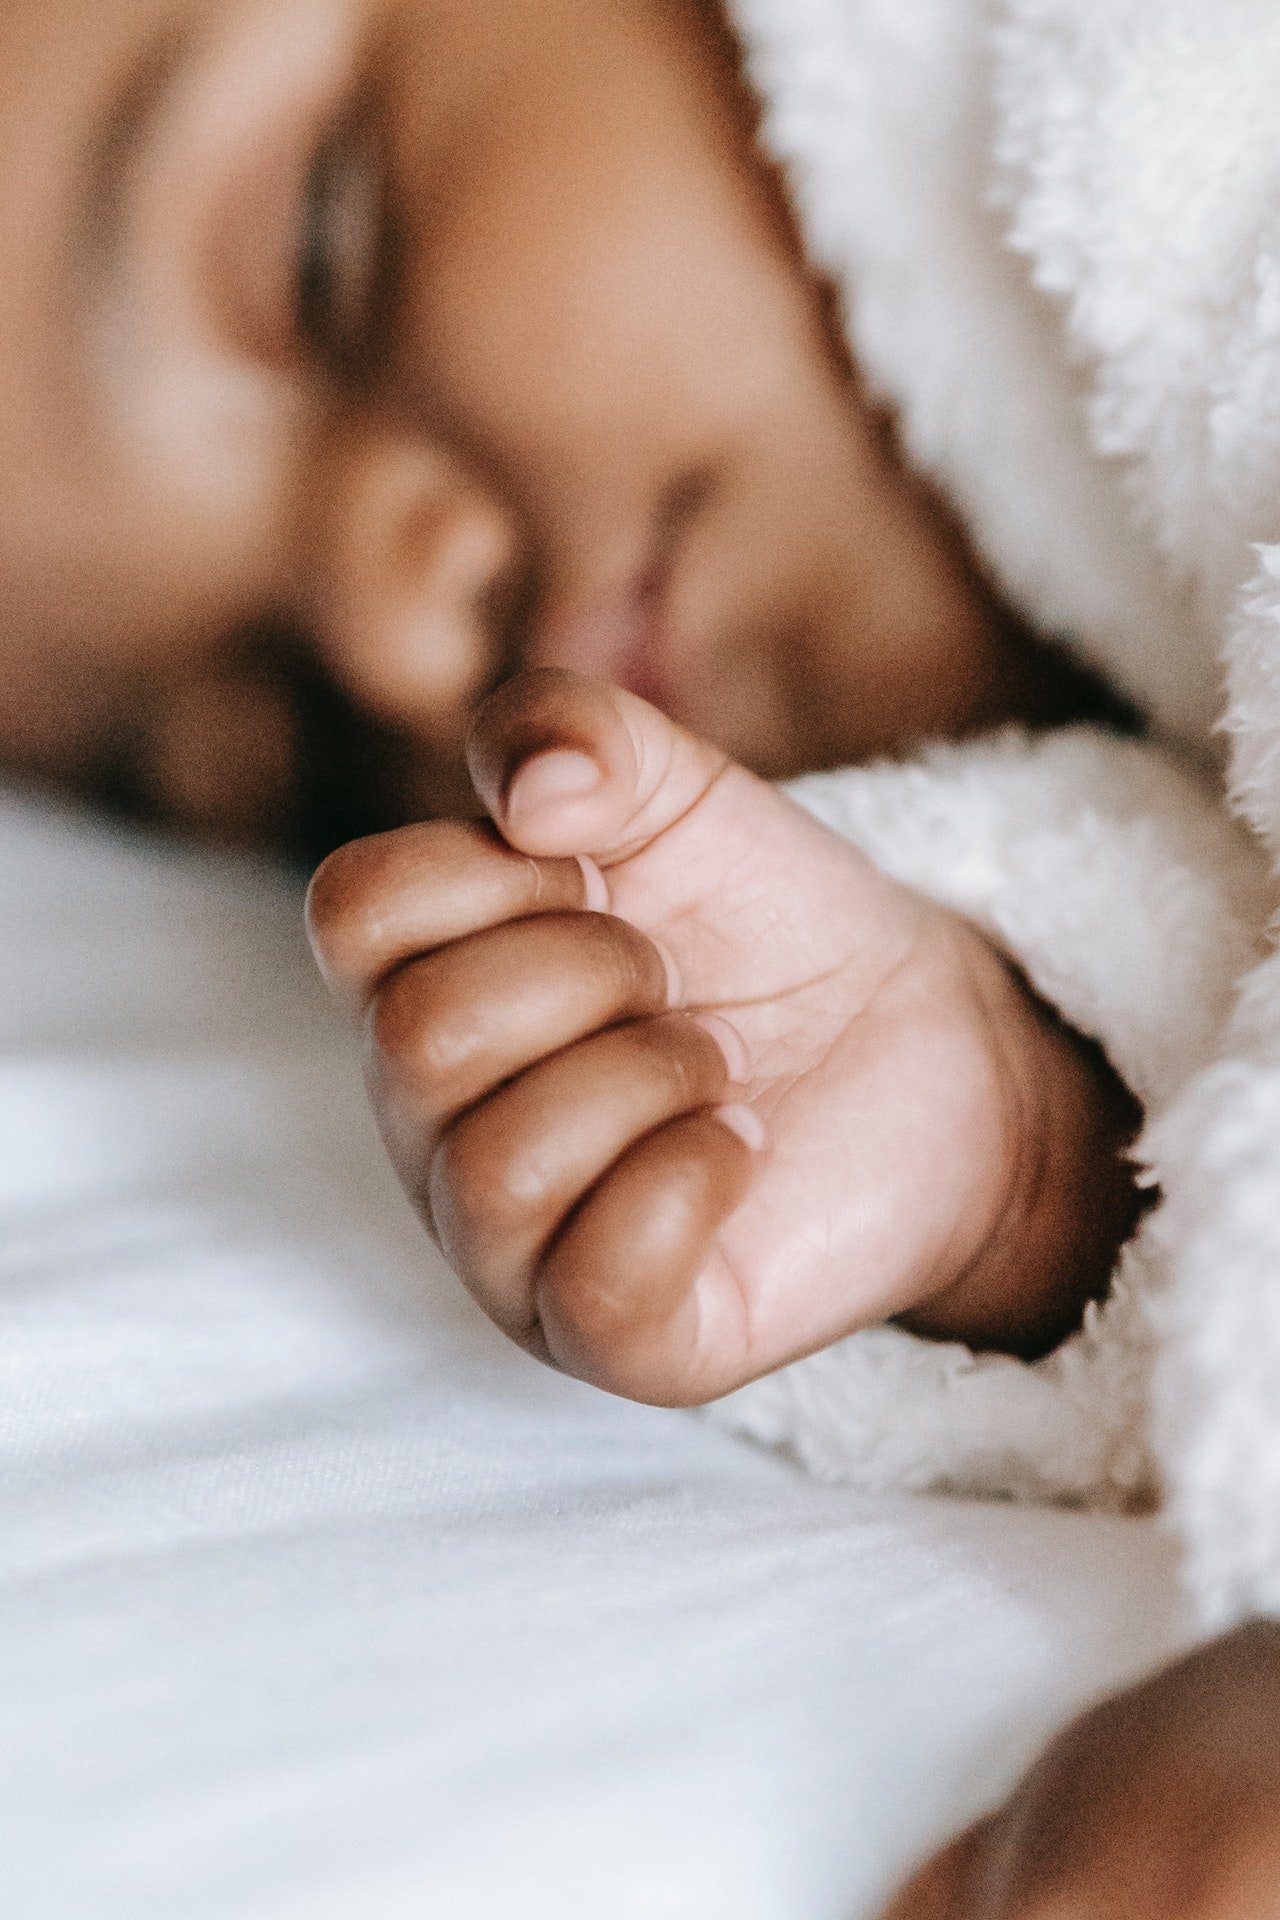 Baby sleeping on a soft bed | Photo: Pexels